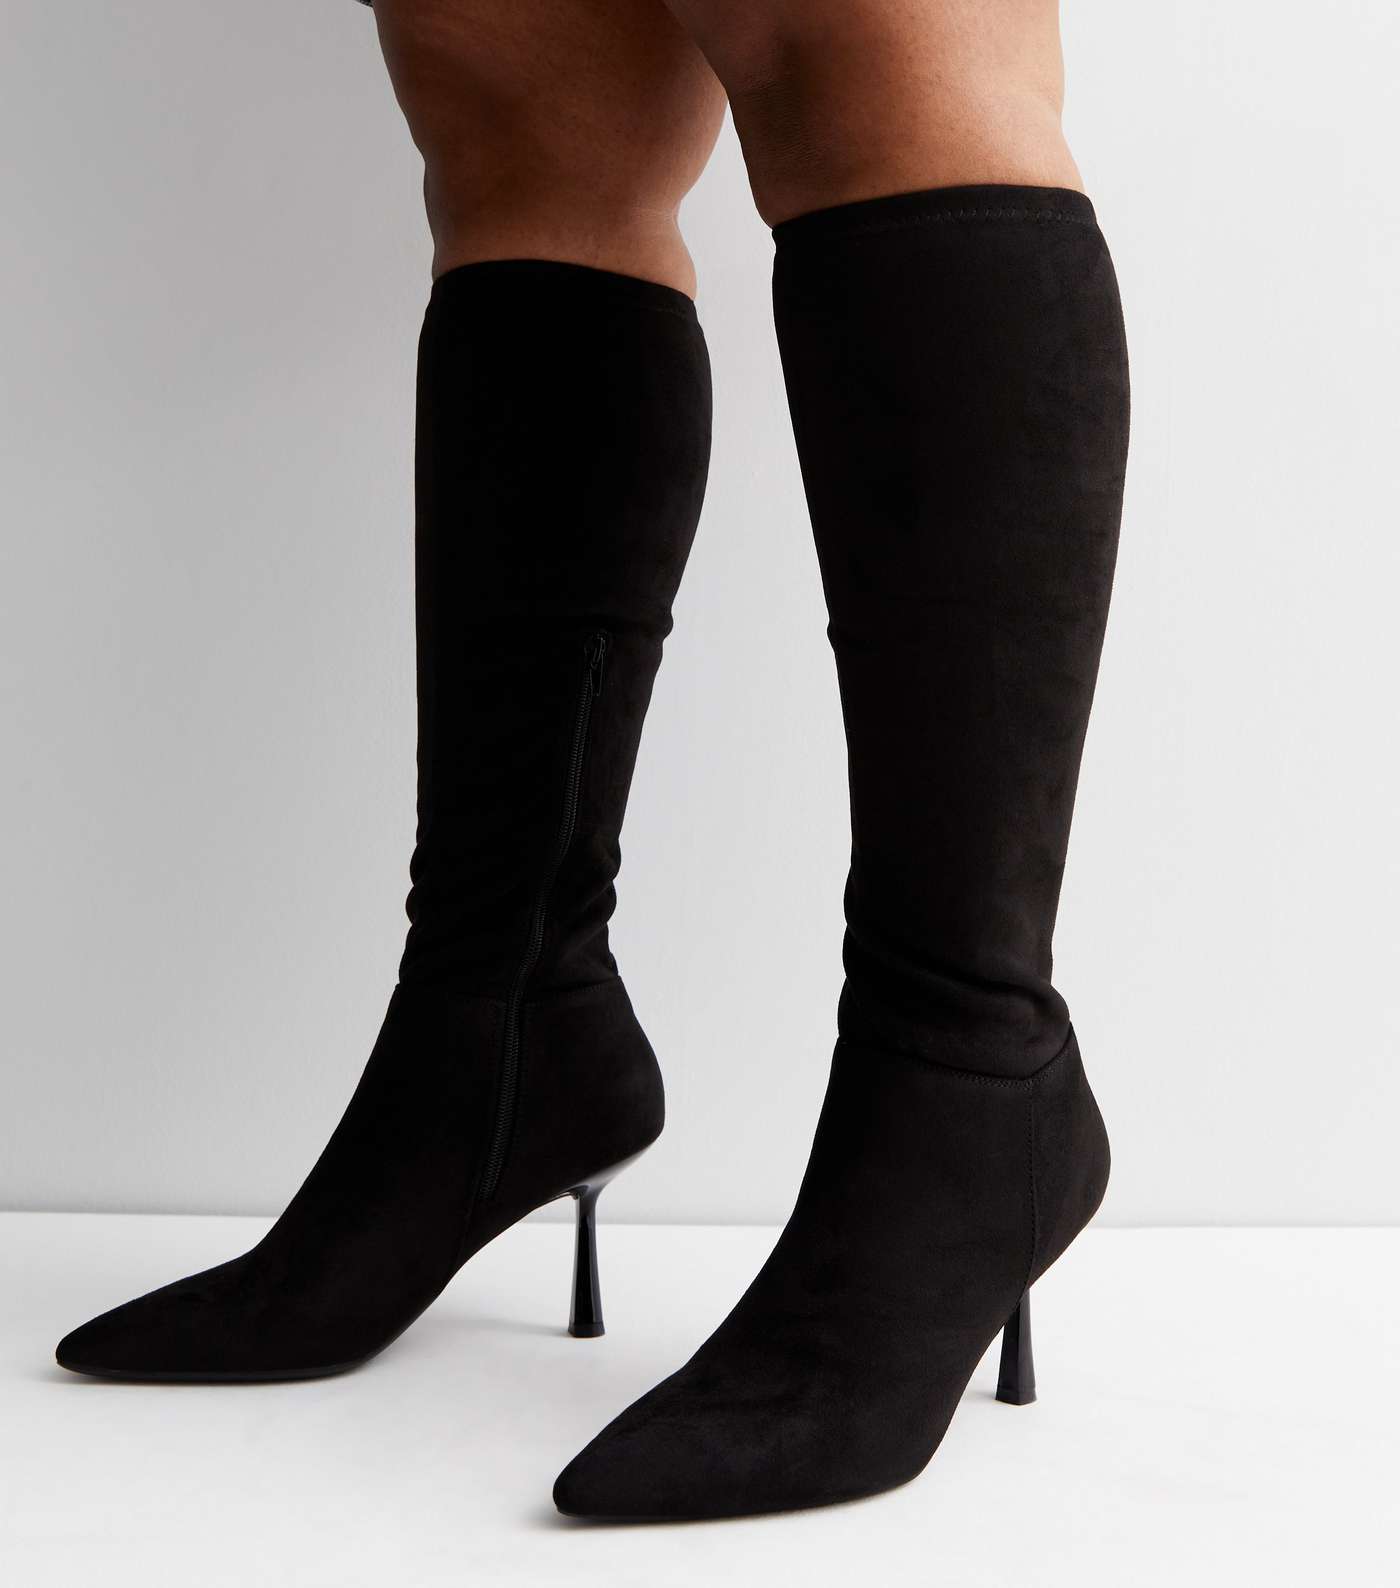 Black Suedette Pointed Stiletto Knee High Boots Image 2